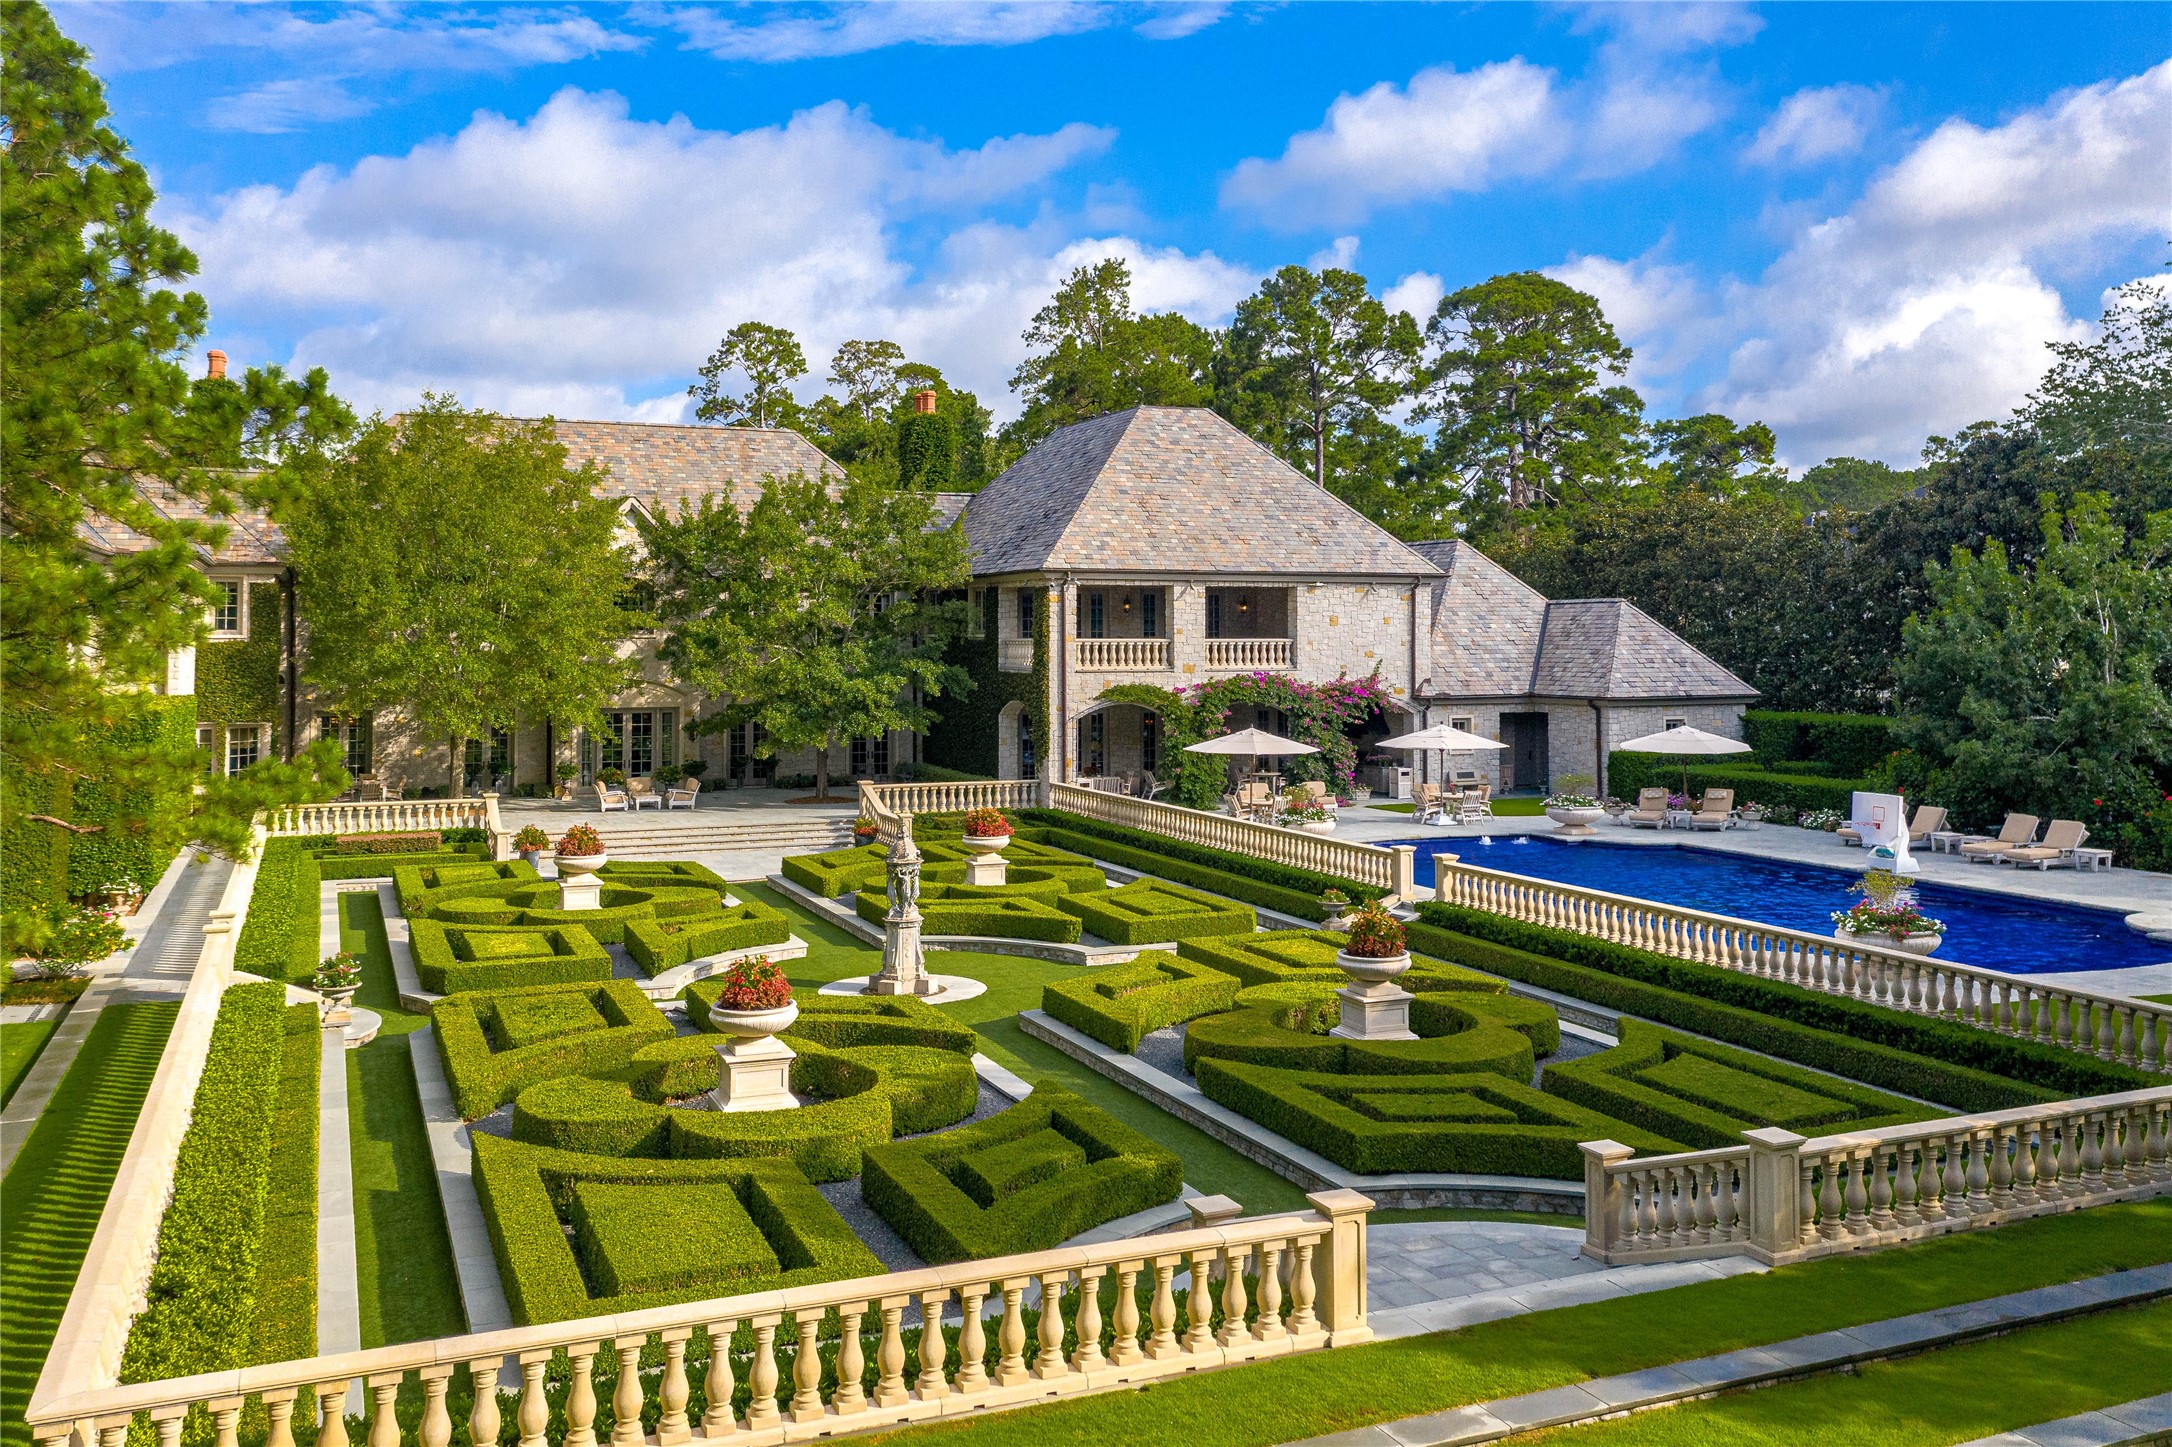 Perfectly sculpted gardens and wooded pockets offer endless exploration and admiration, the impressive views are breathtaking from anywhere on the grounds.